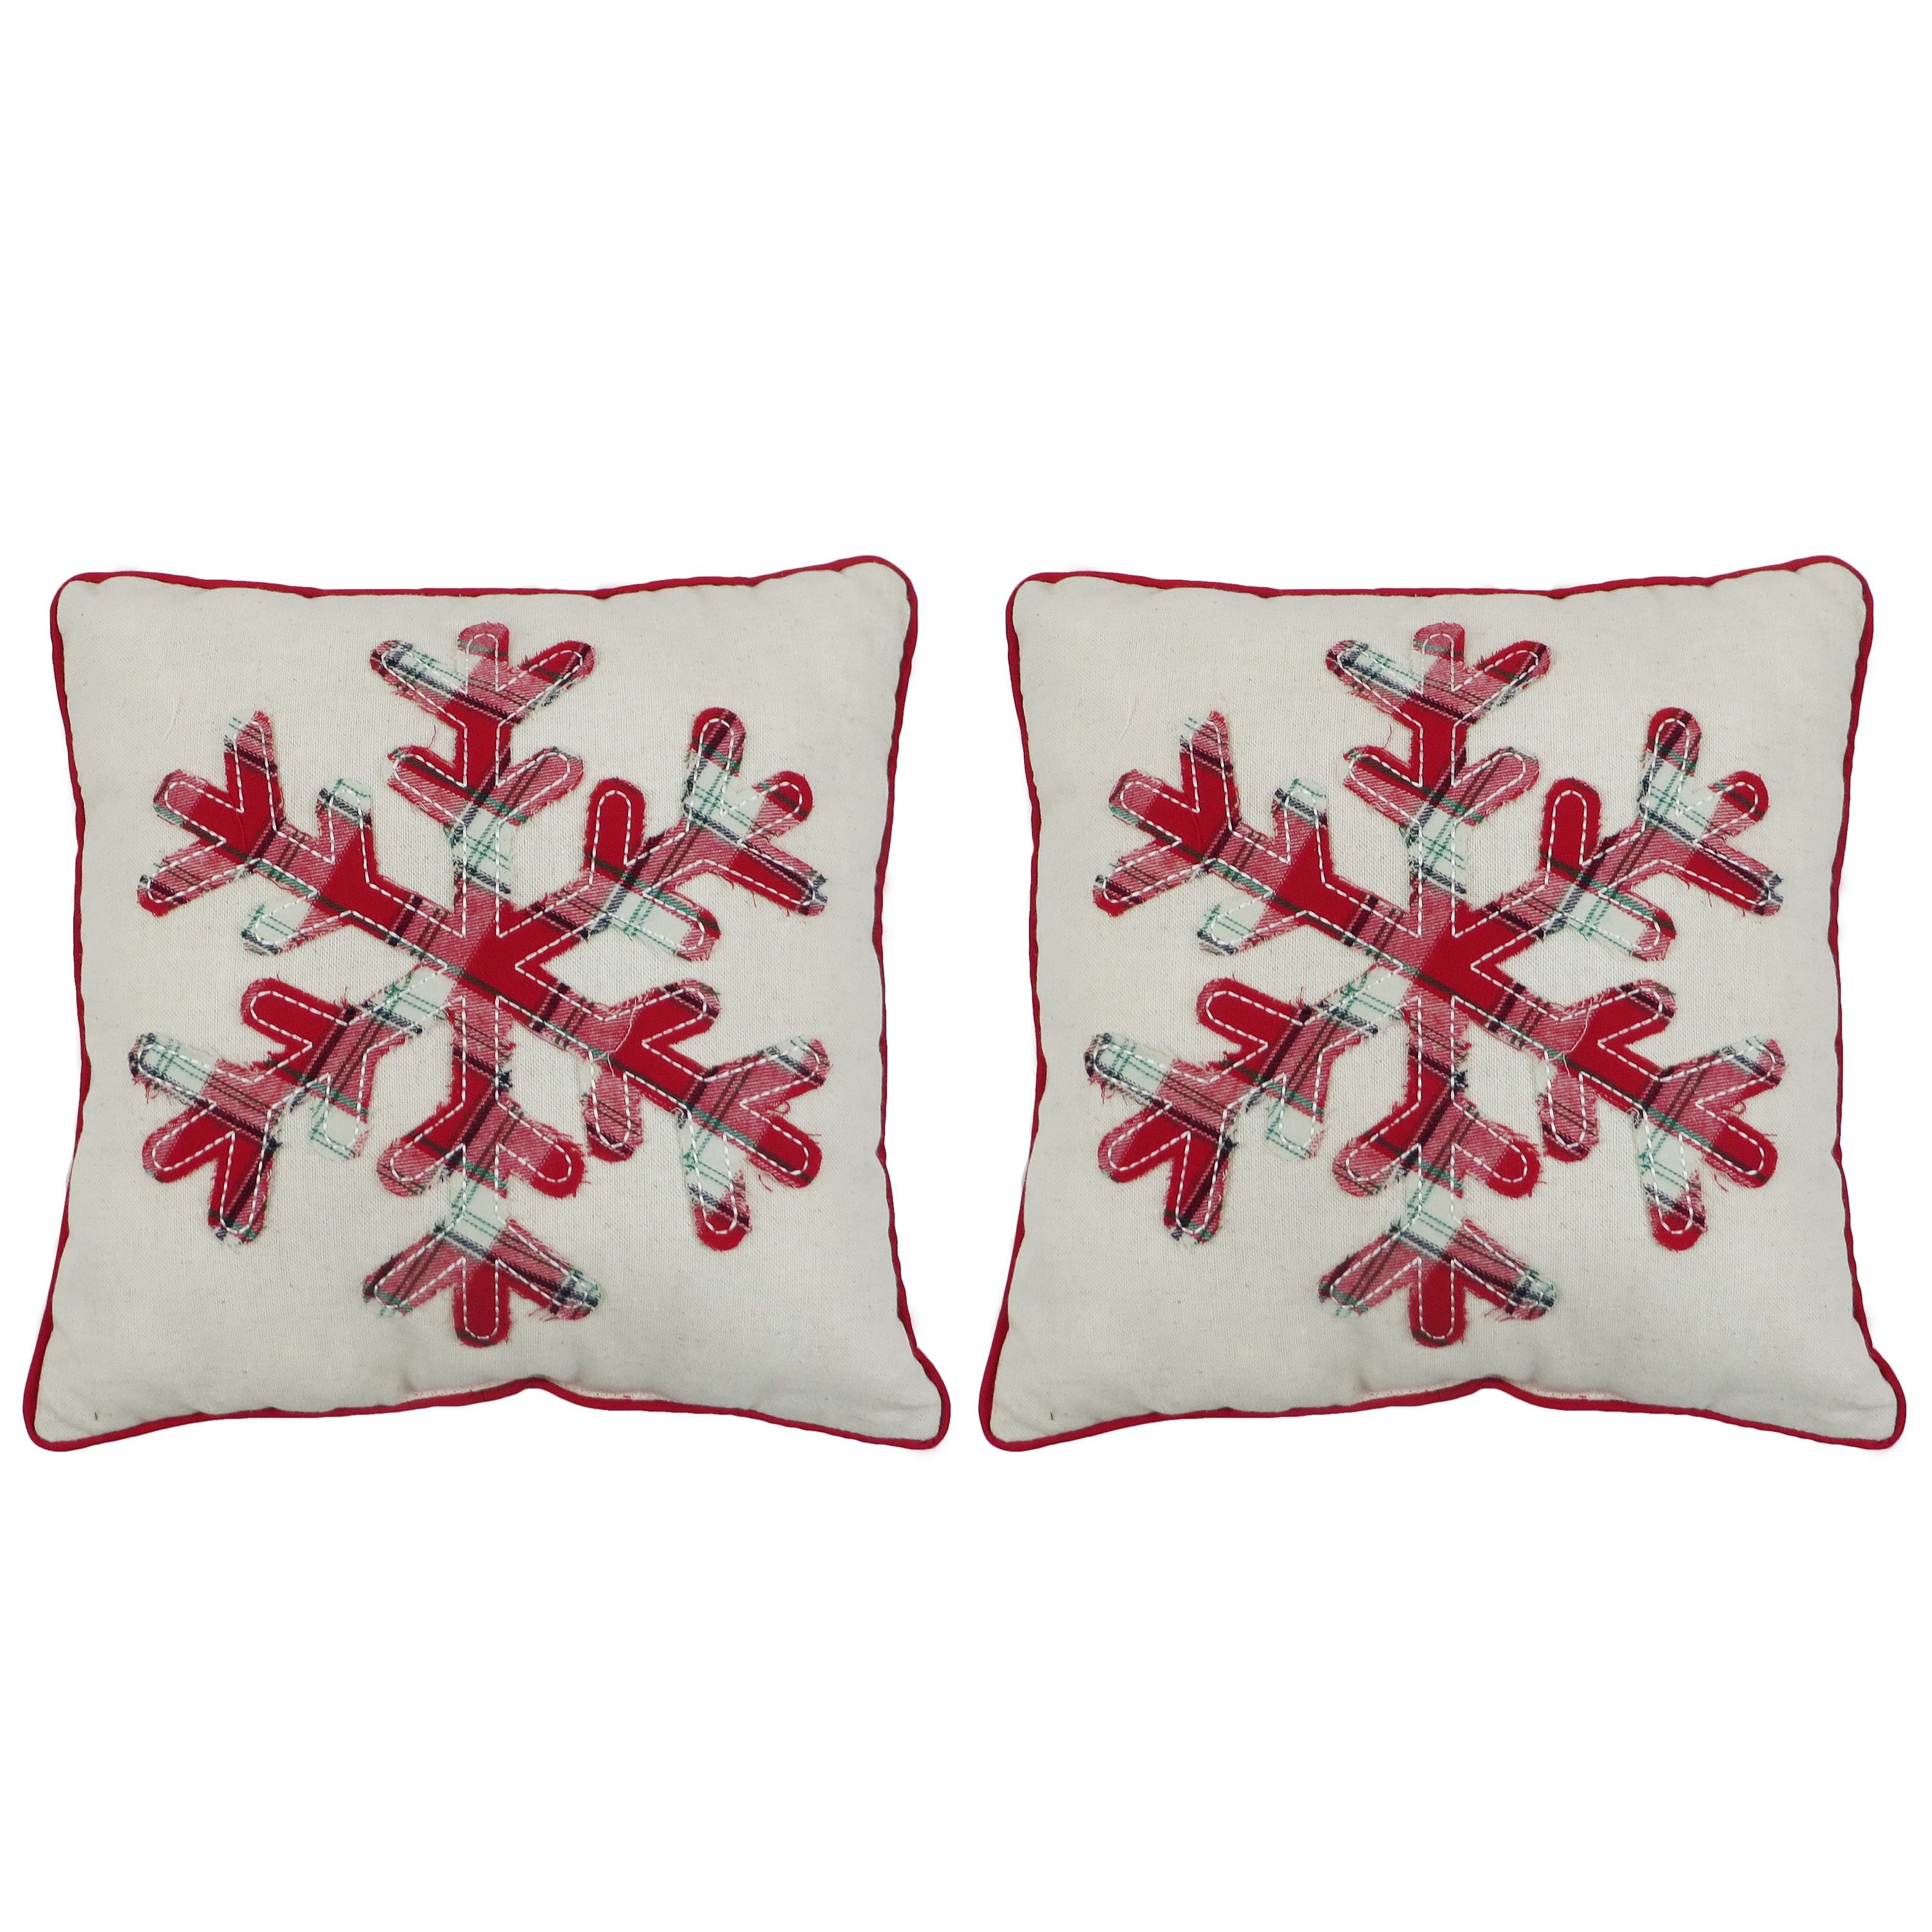 Holiday Time 2pack 14x14" Red Plaid Snowflake Pillows - image 1 of 2